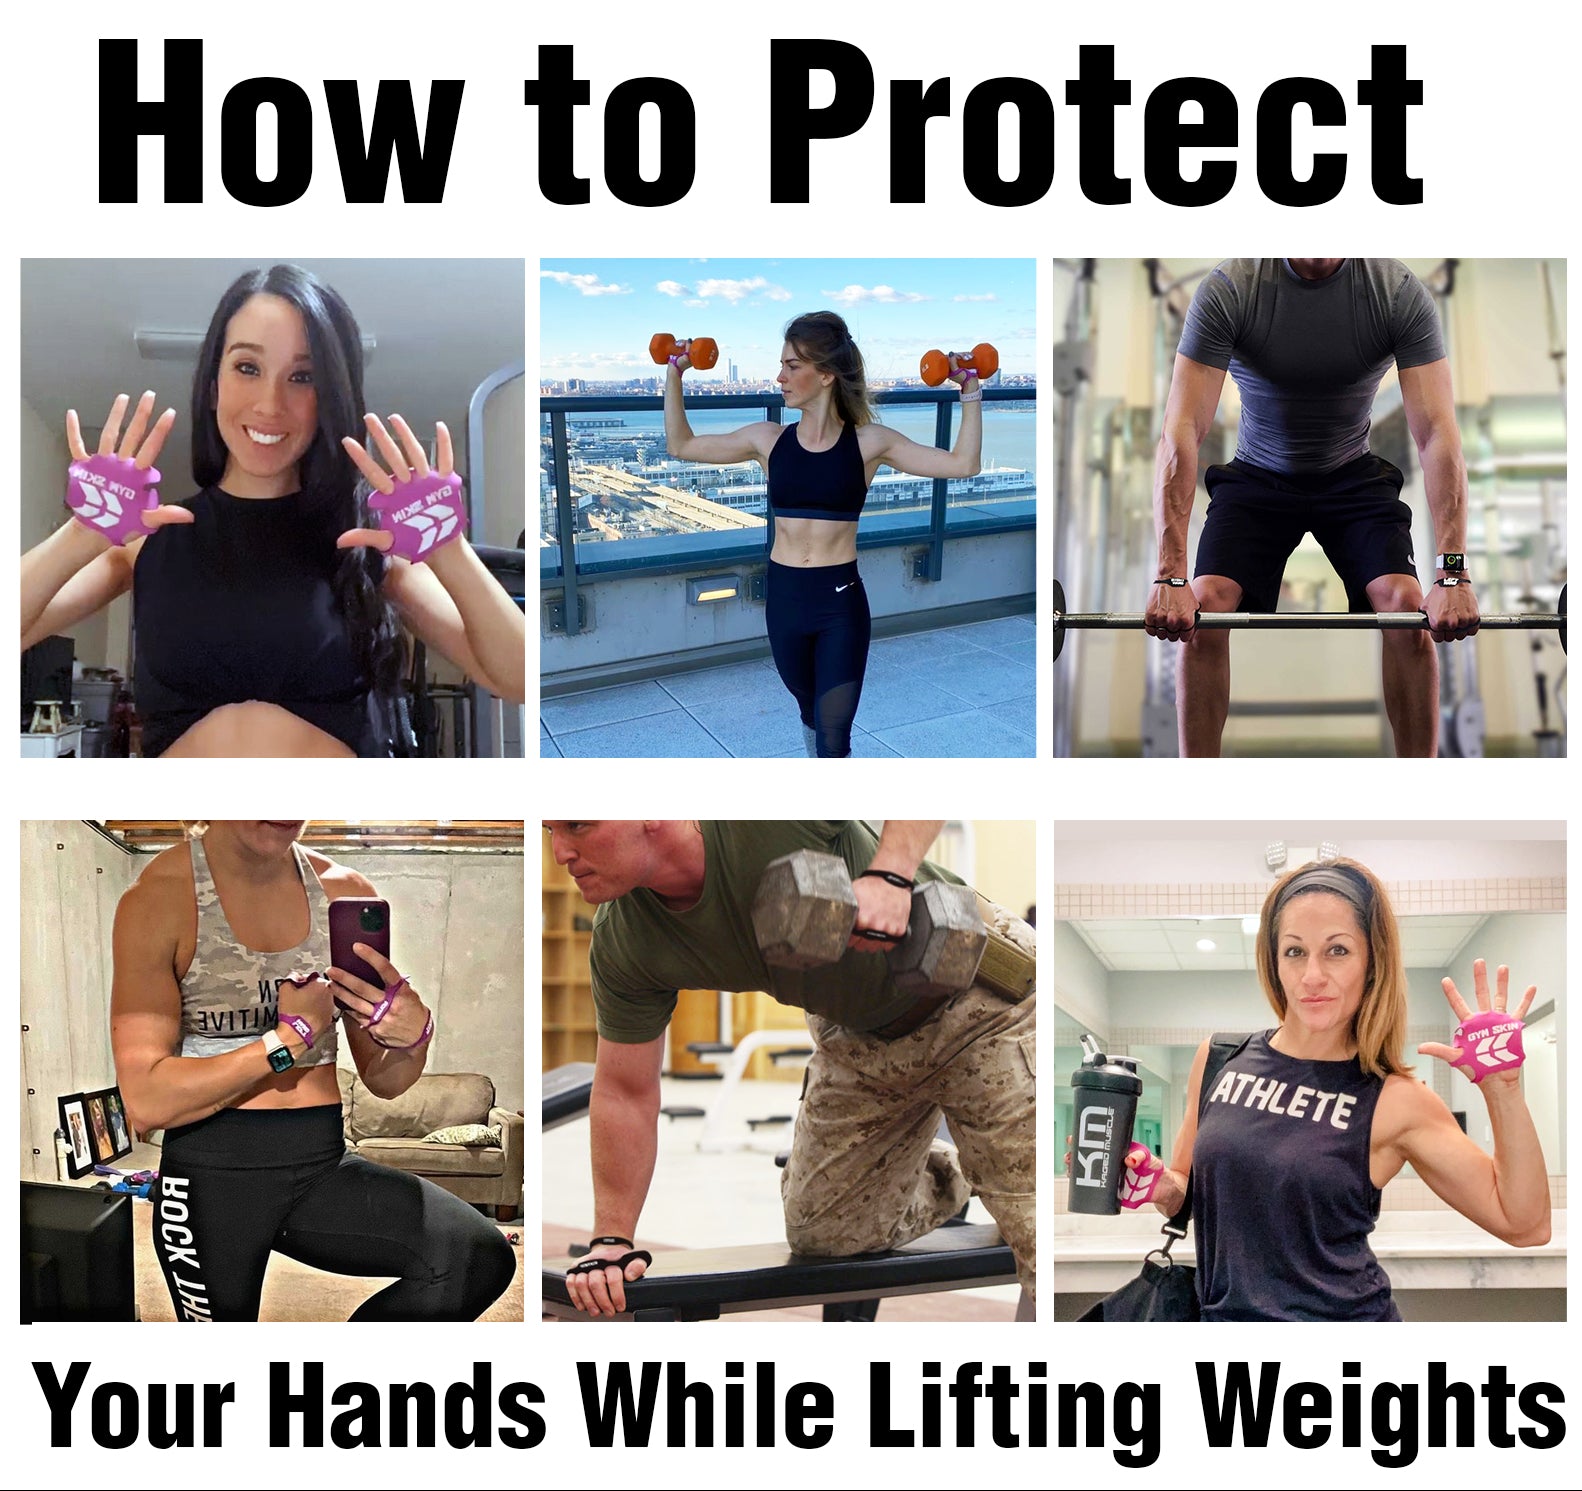 How to Protect Your Hands While Lifting Weights